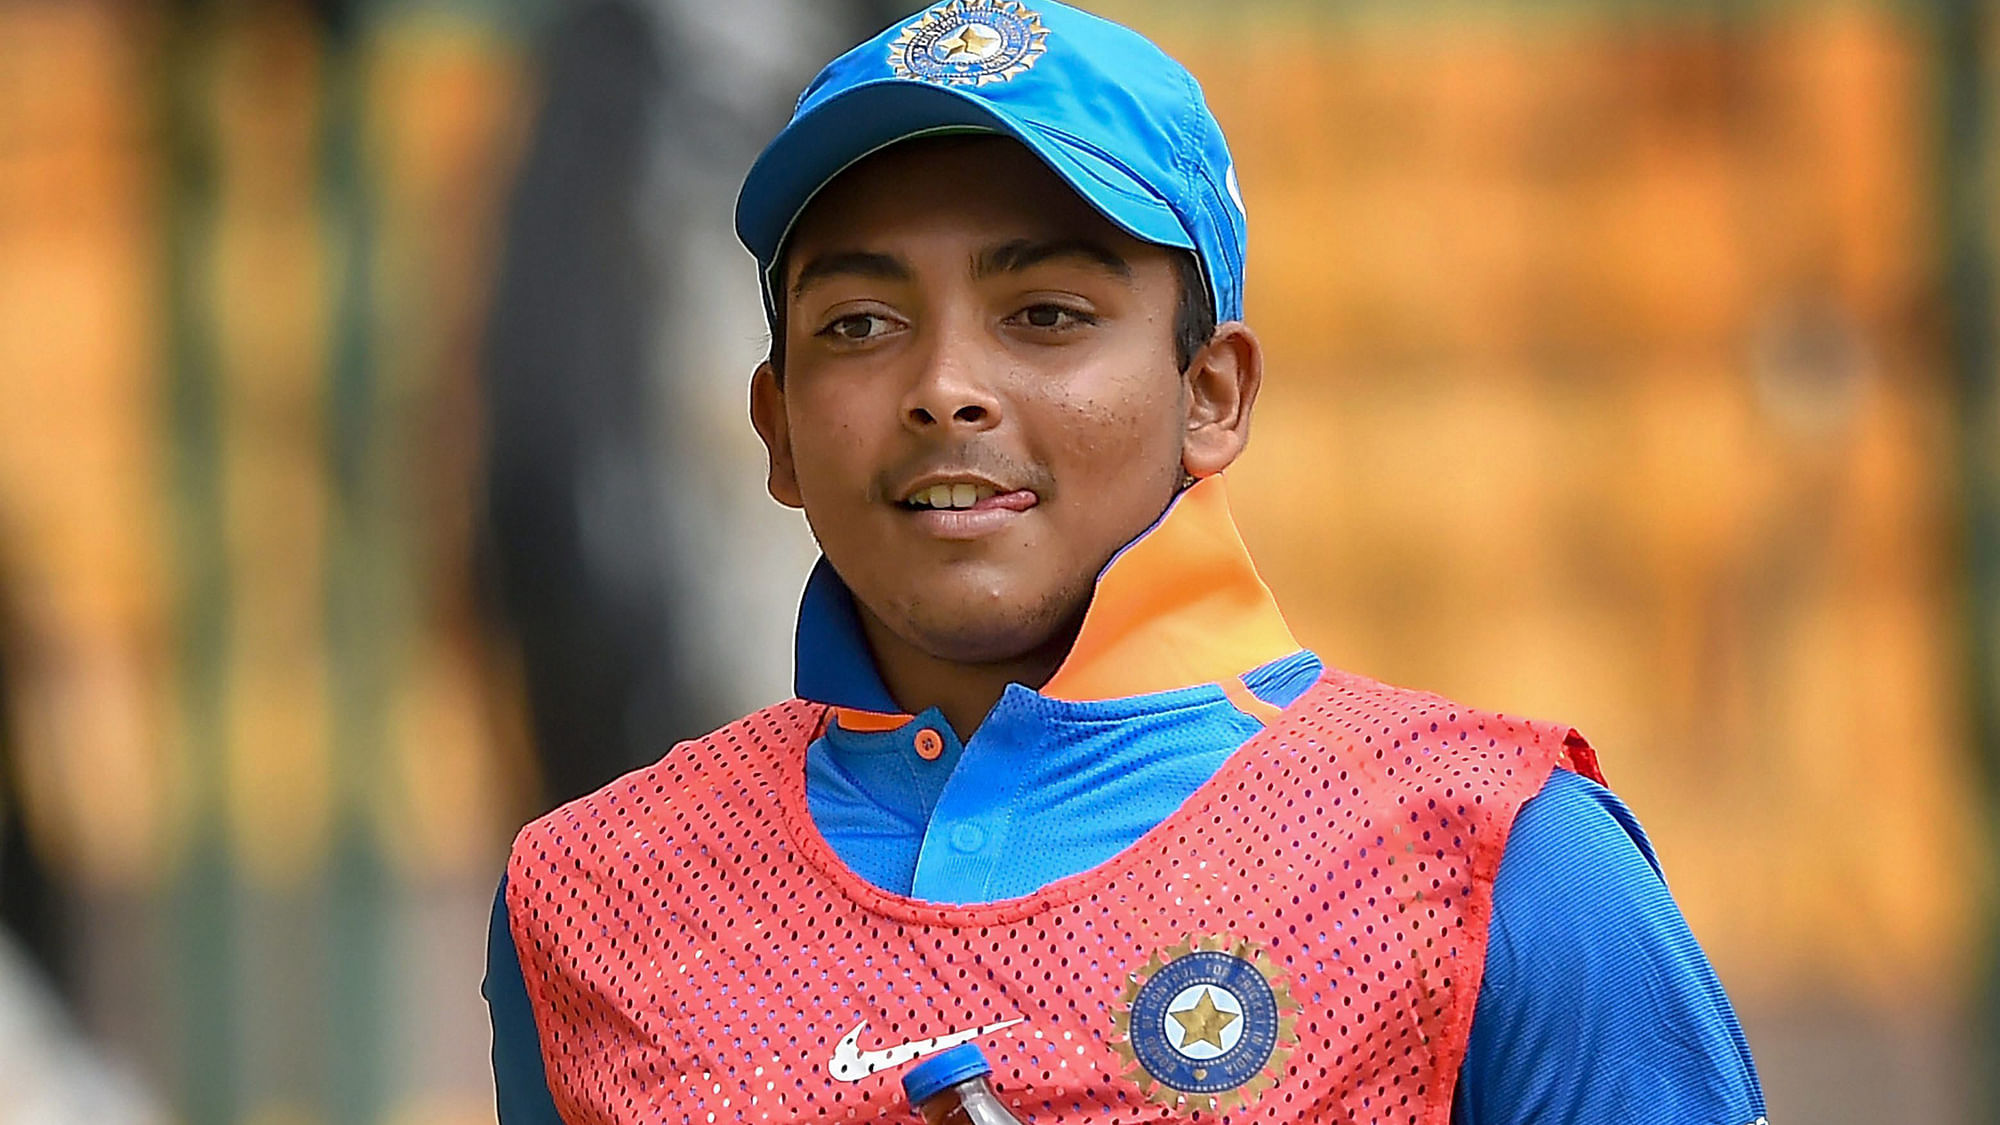 18-year-old Mumbai batsman Prithvi Shaw will be making his debut for India in the first Test against West Indies starting Thursday.